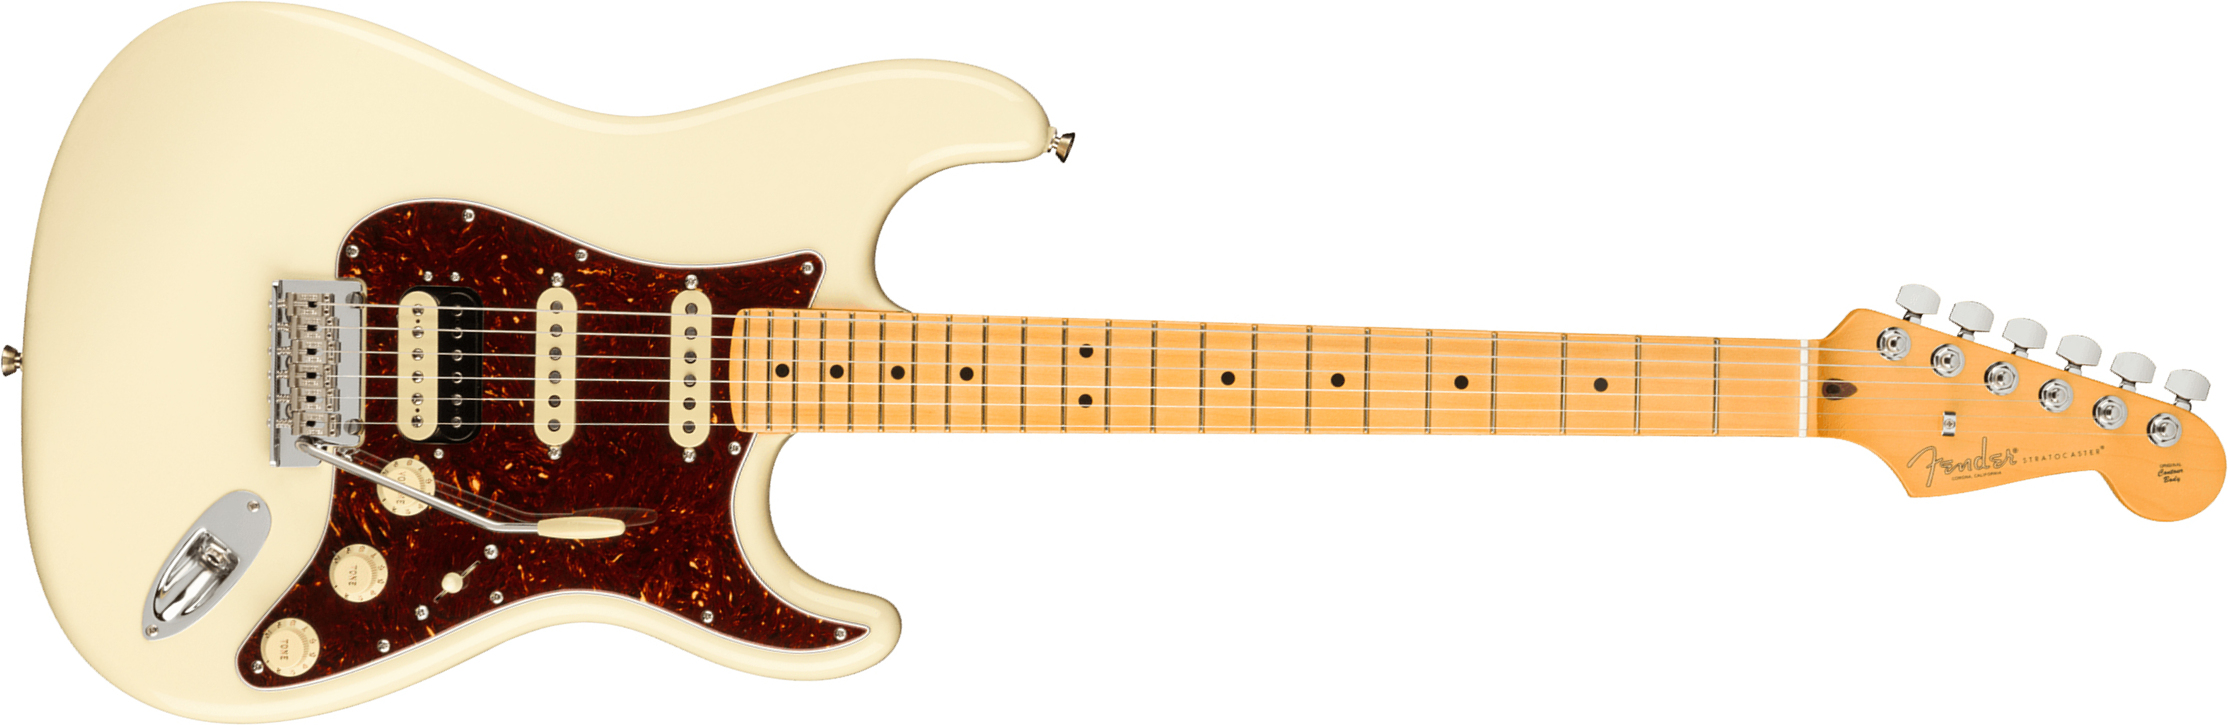 Fender Strat American Professional Ii Hss Usa Mn - Olympic White - Str shape electric guitar - Main picture